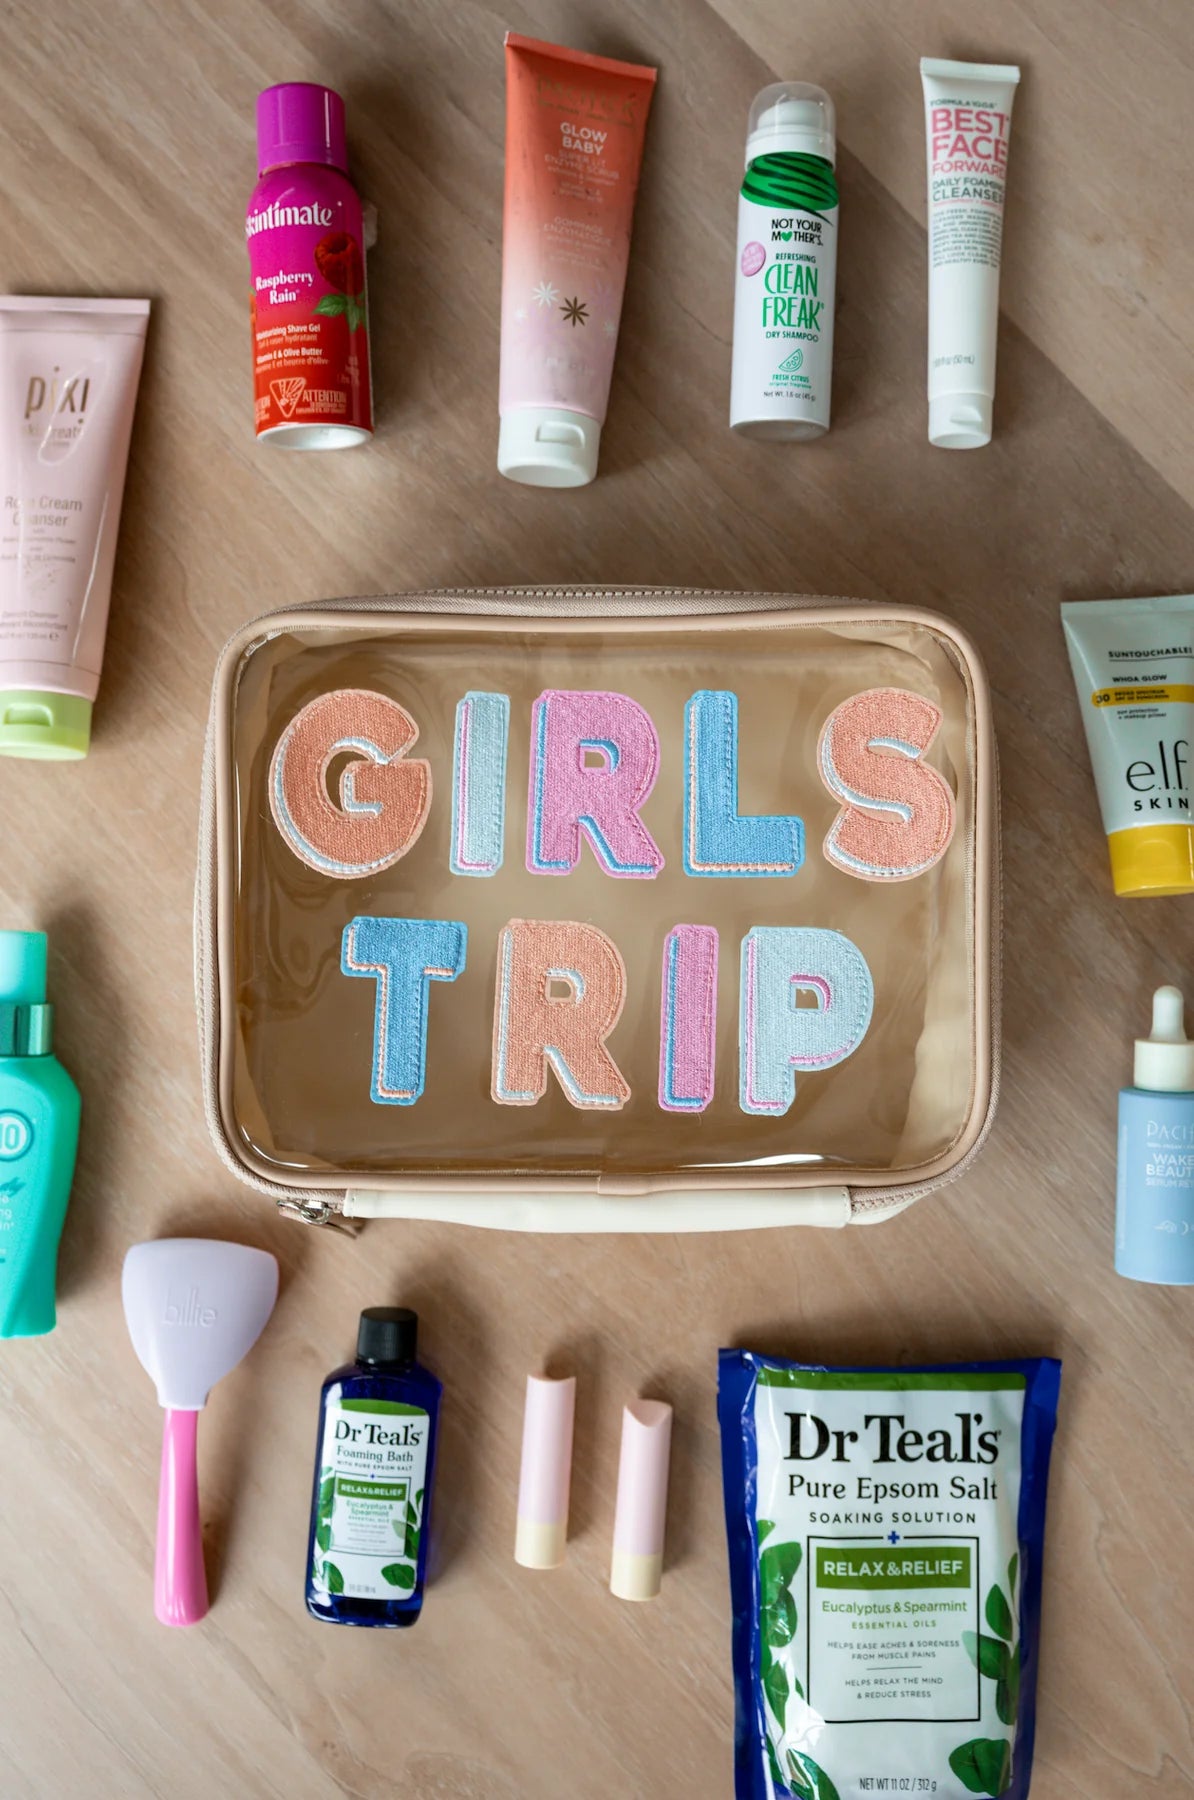 Girl's Trip Oversized Cosmetic Bag Clear/Colorful Letters